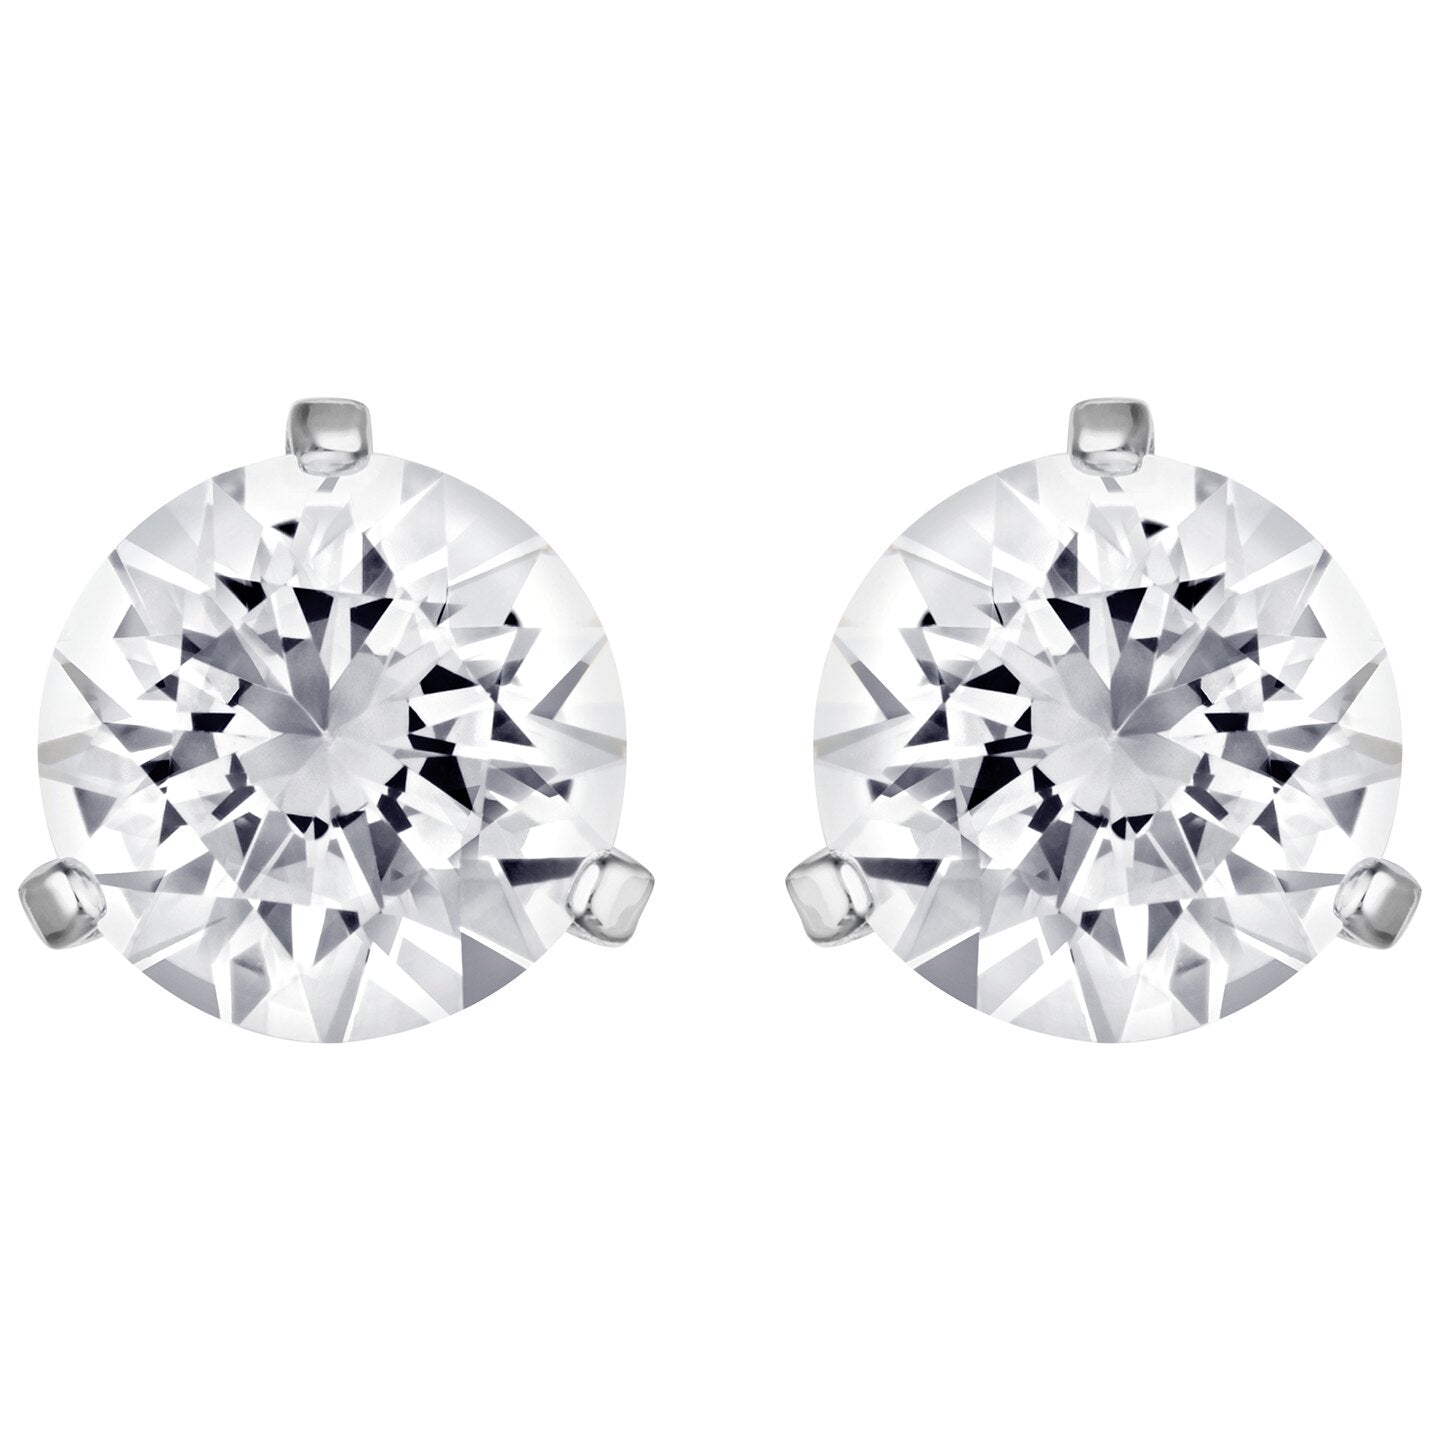 SOLITAIRE PIERCED EARRINGS, WHITE, RHODIUM PLATED